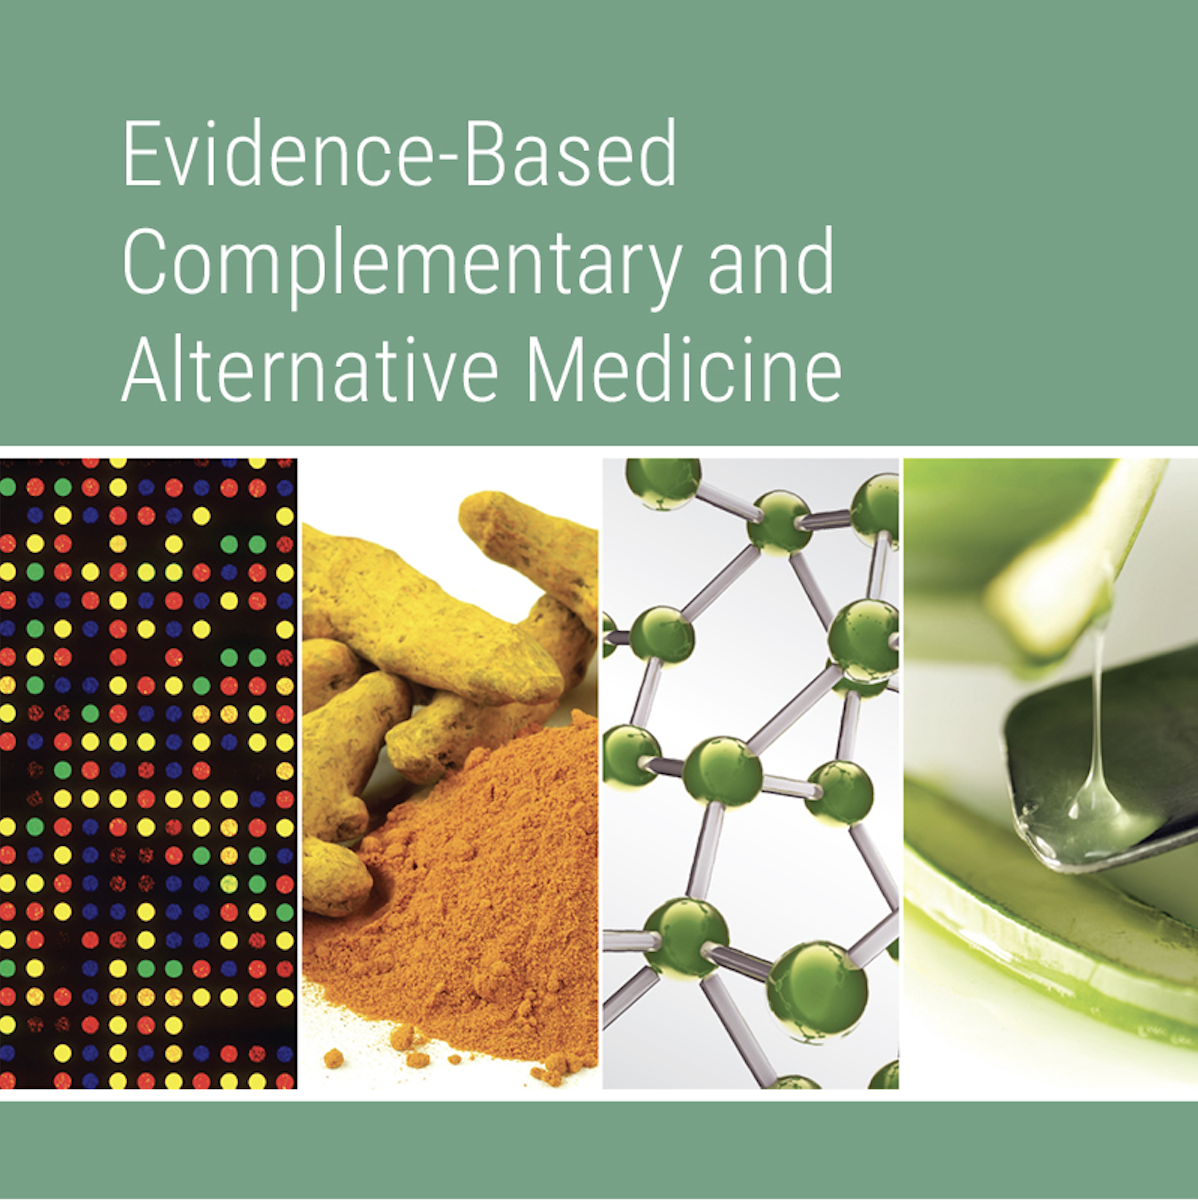 Evidence-Based Complementary and Alternative Medicine